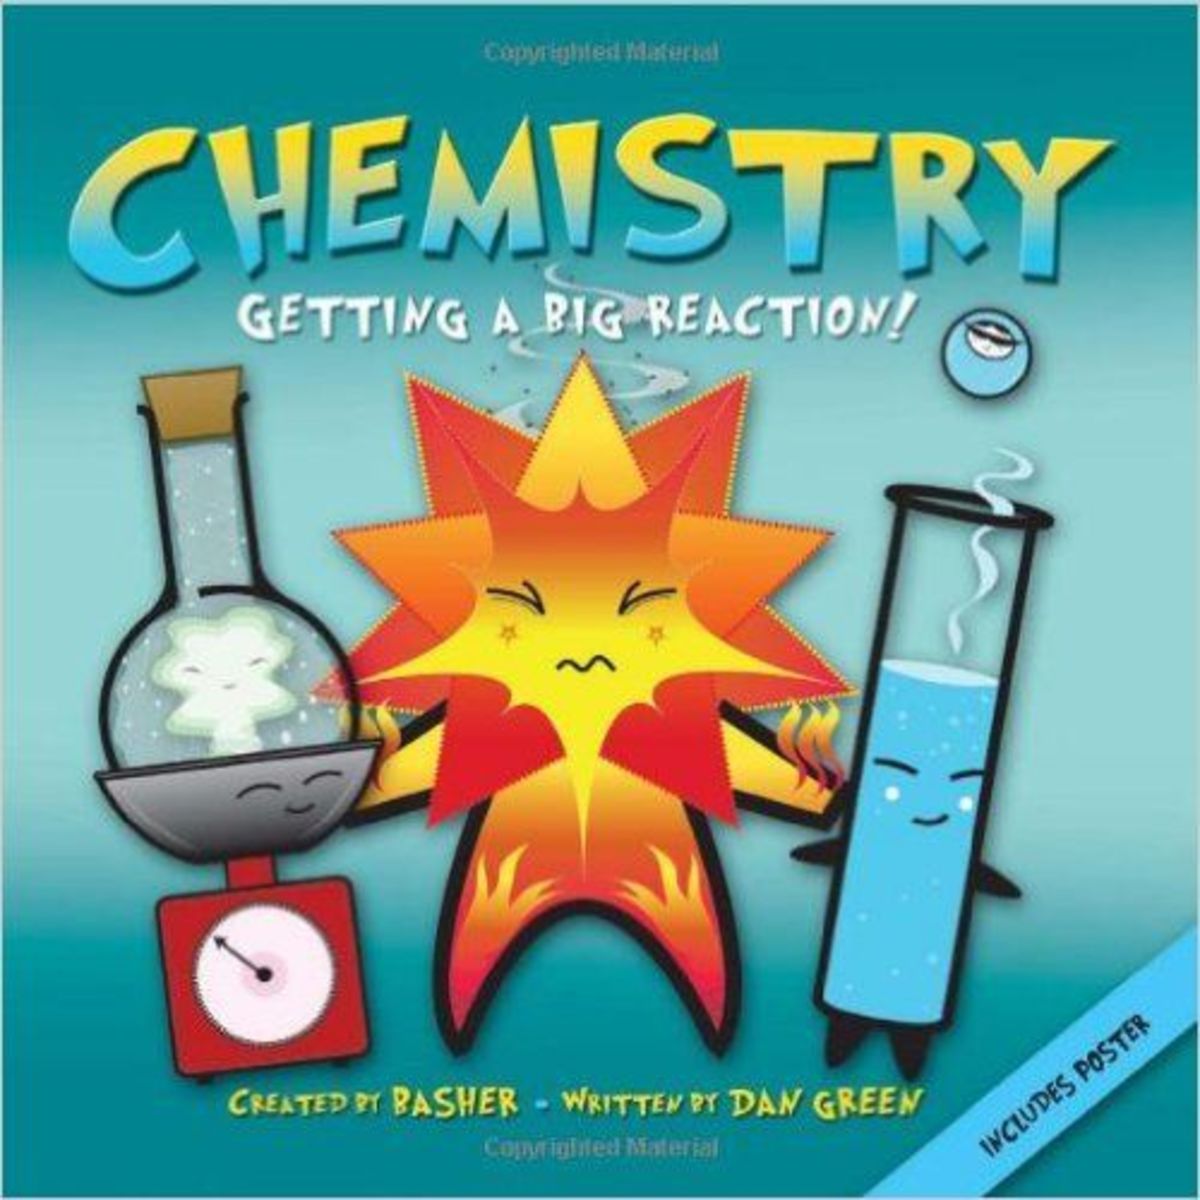 Best Introductory Science Books Series for Preschool and Elementary